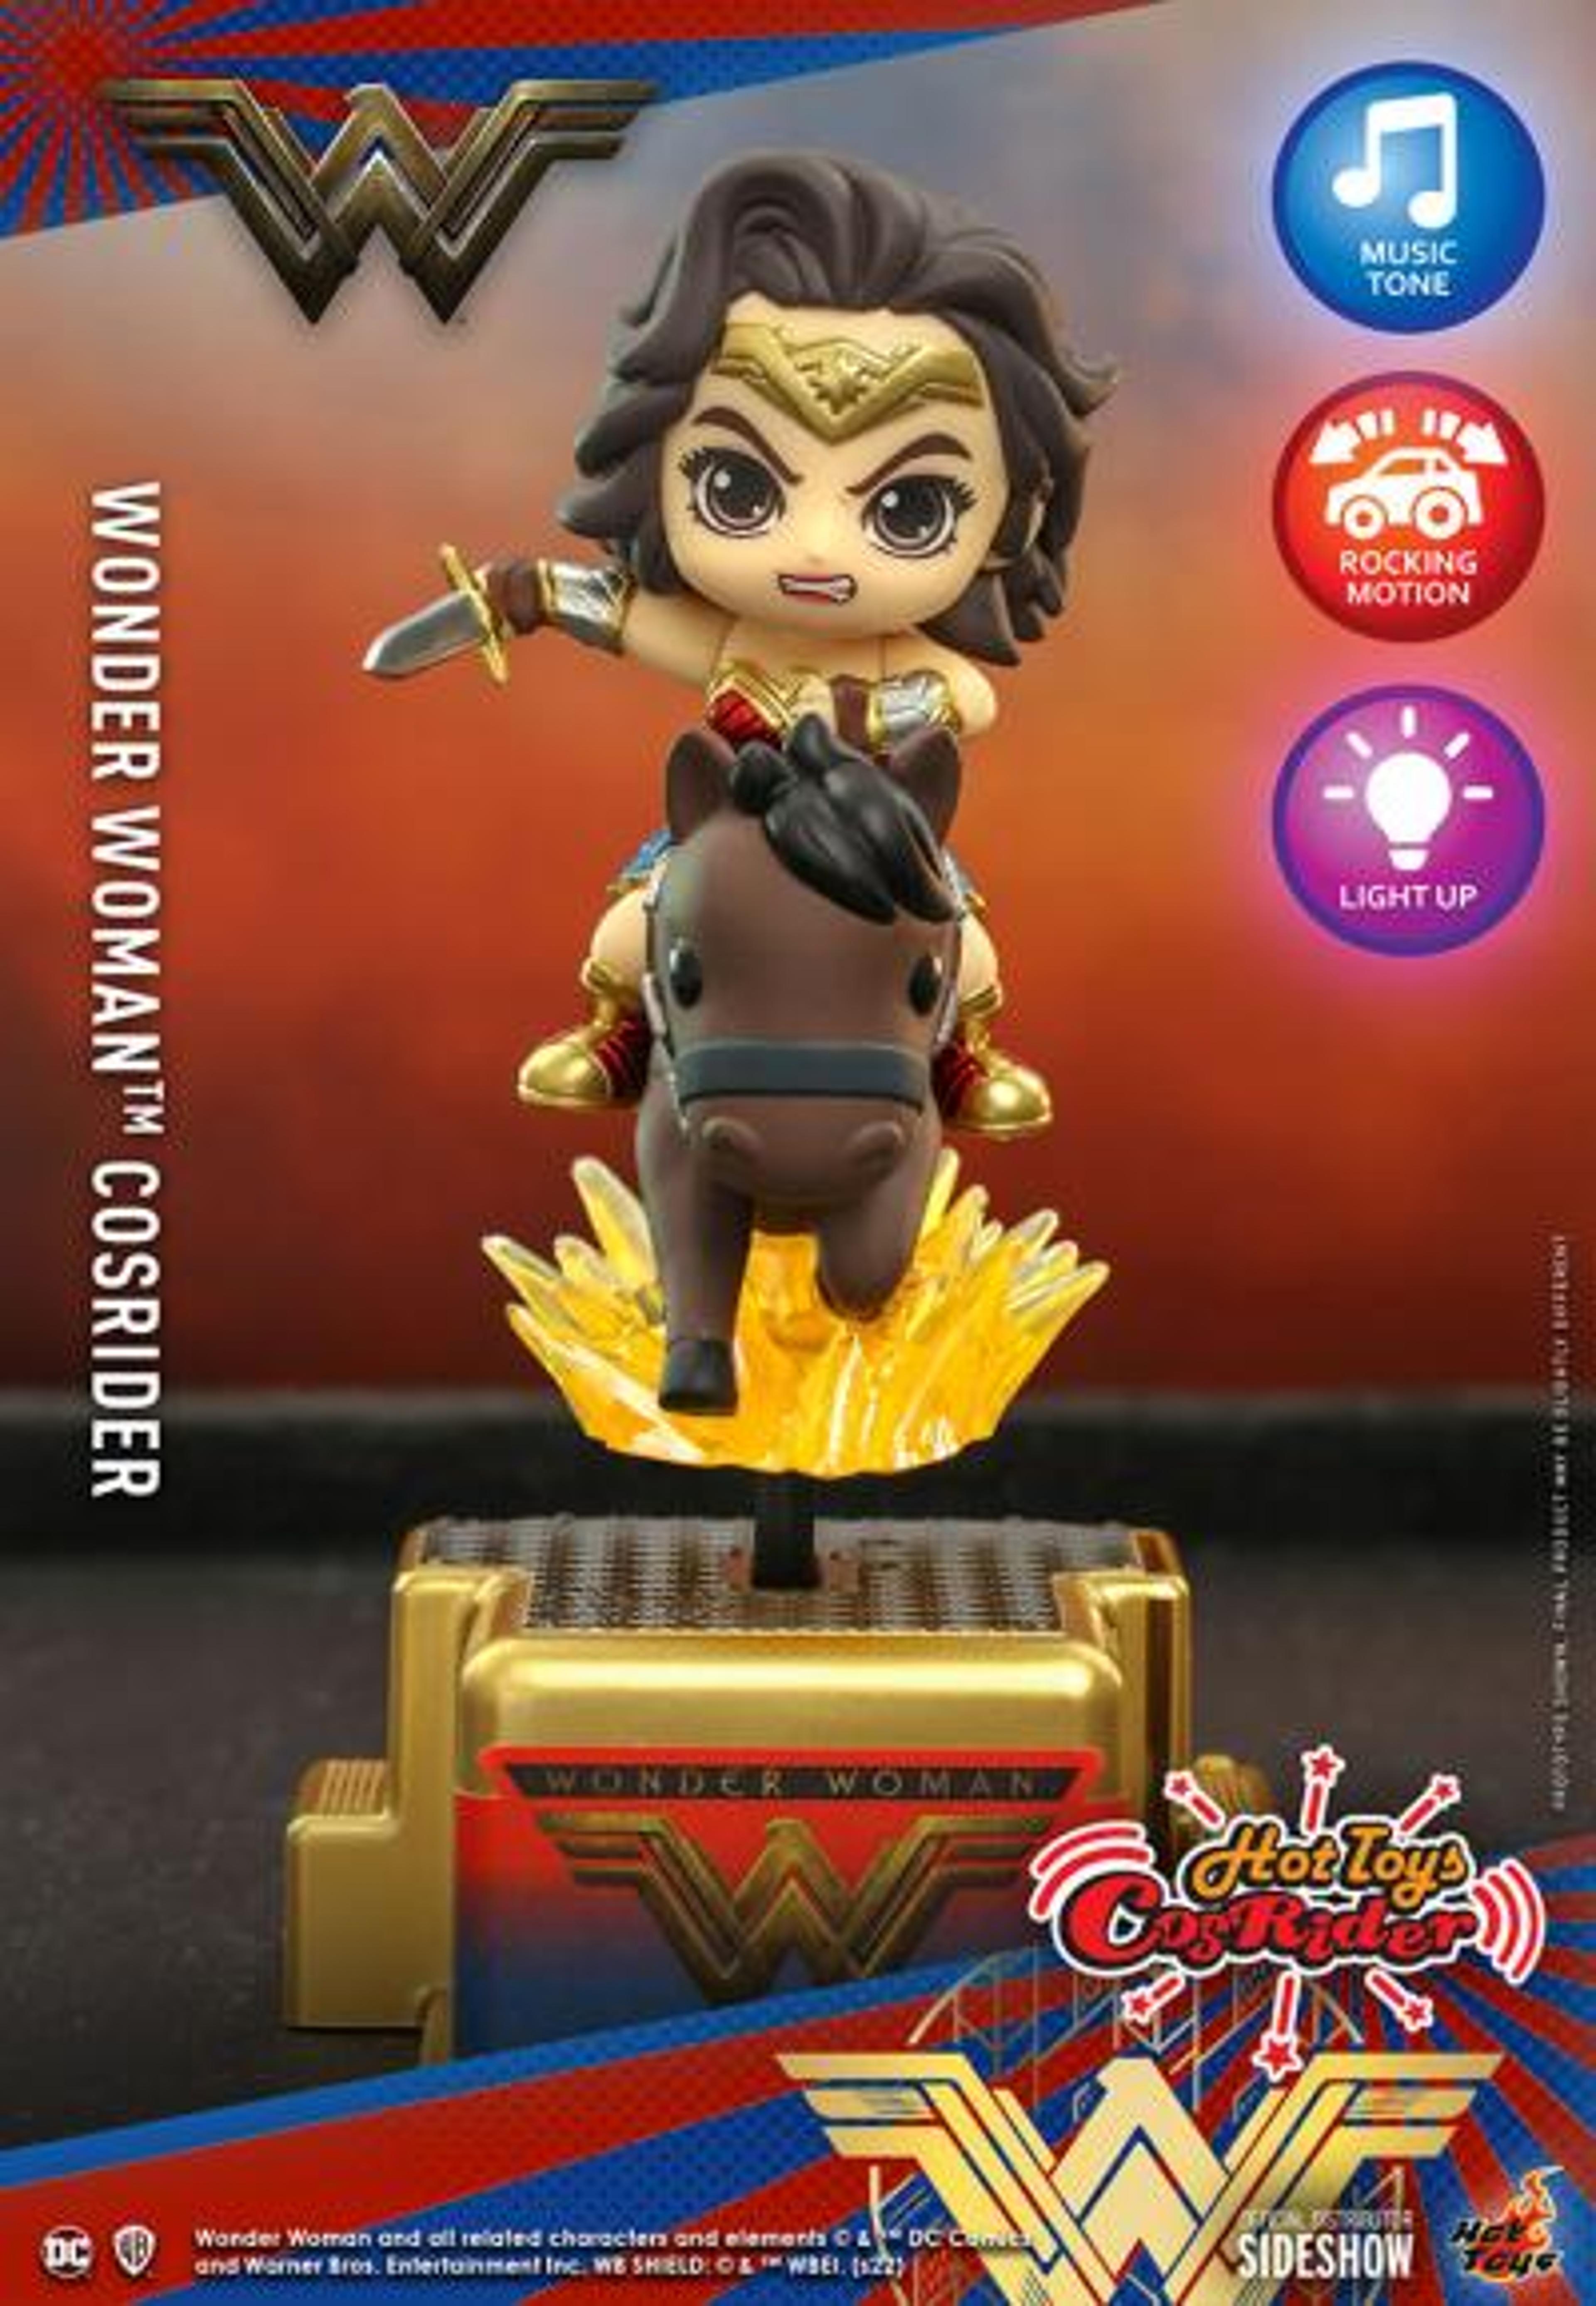 WONDER WOMAN Collectible Figure by Hot Toys